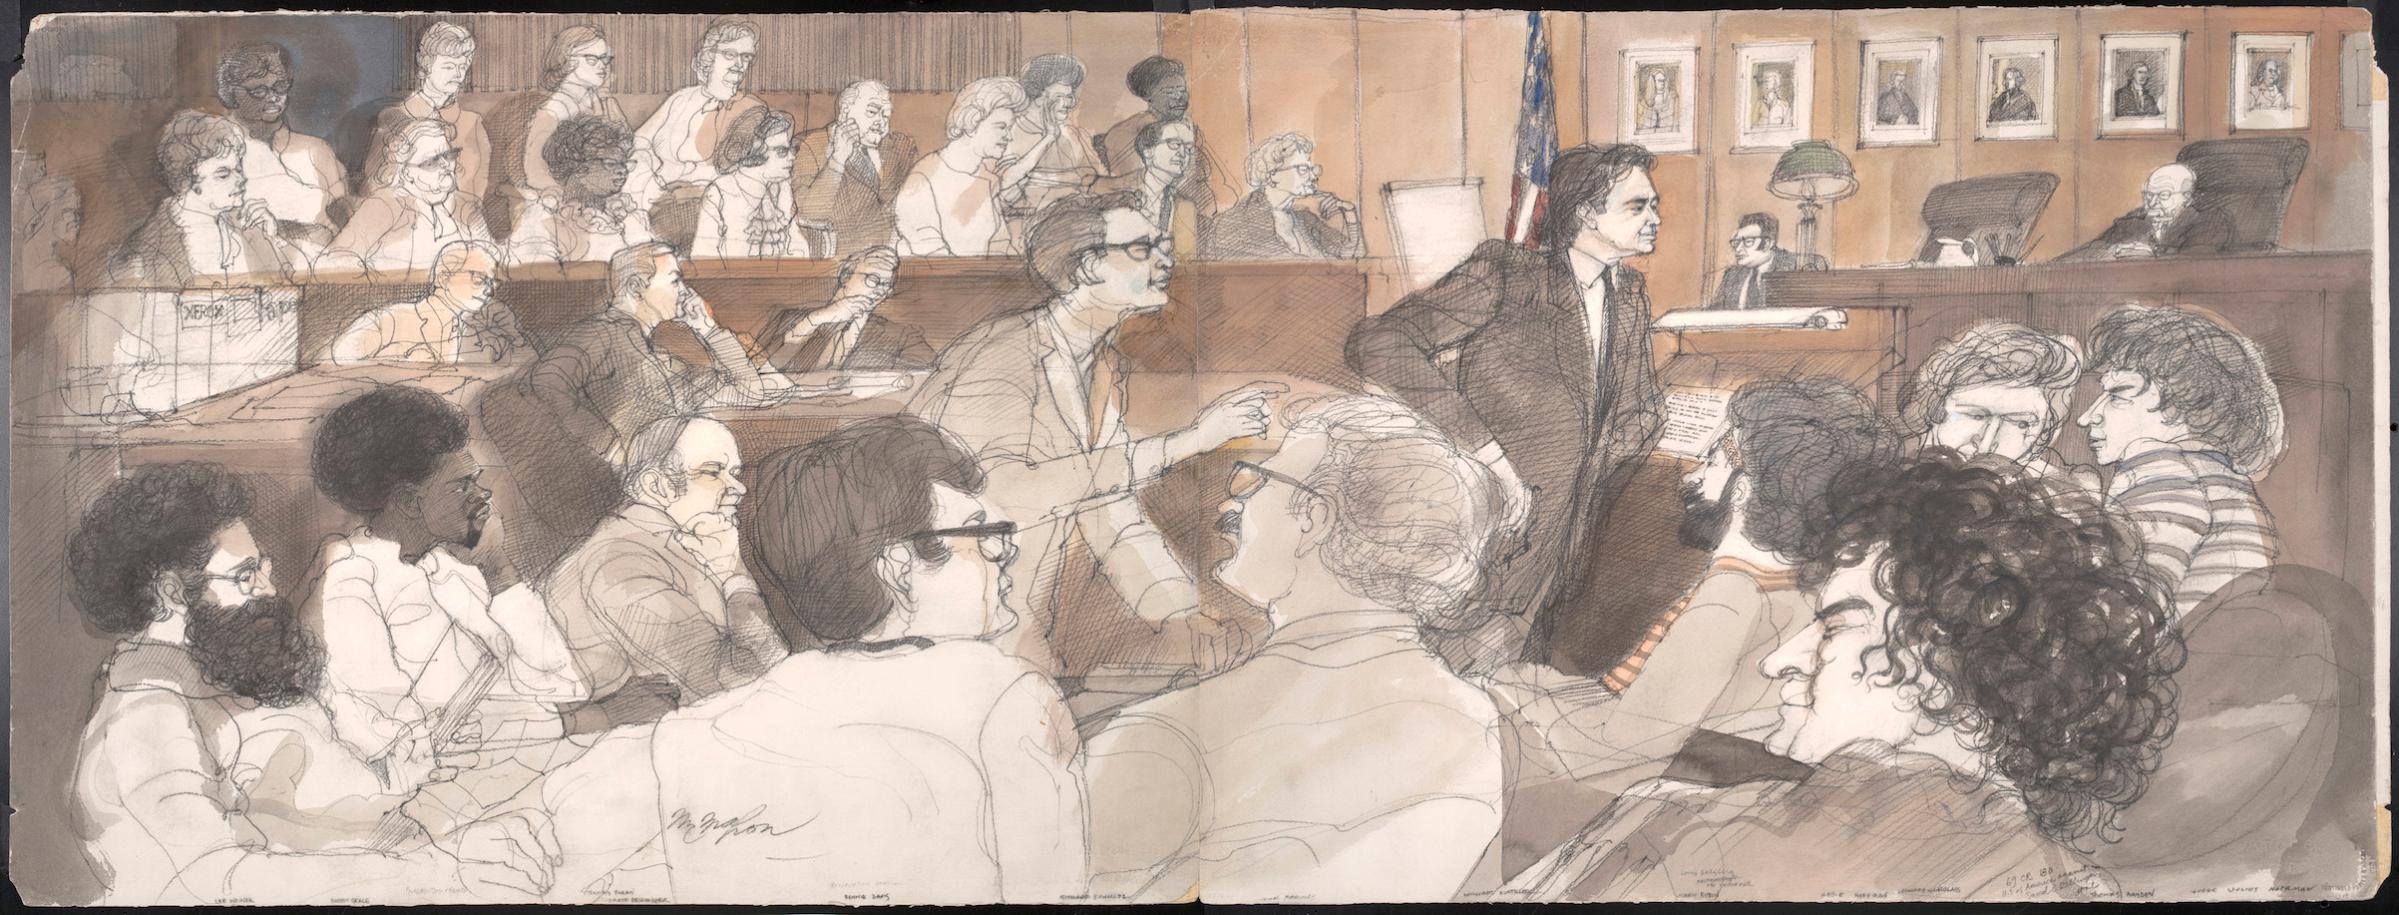 Courtroom During Chicago Eight Trial